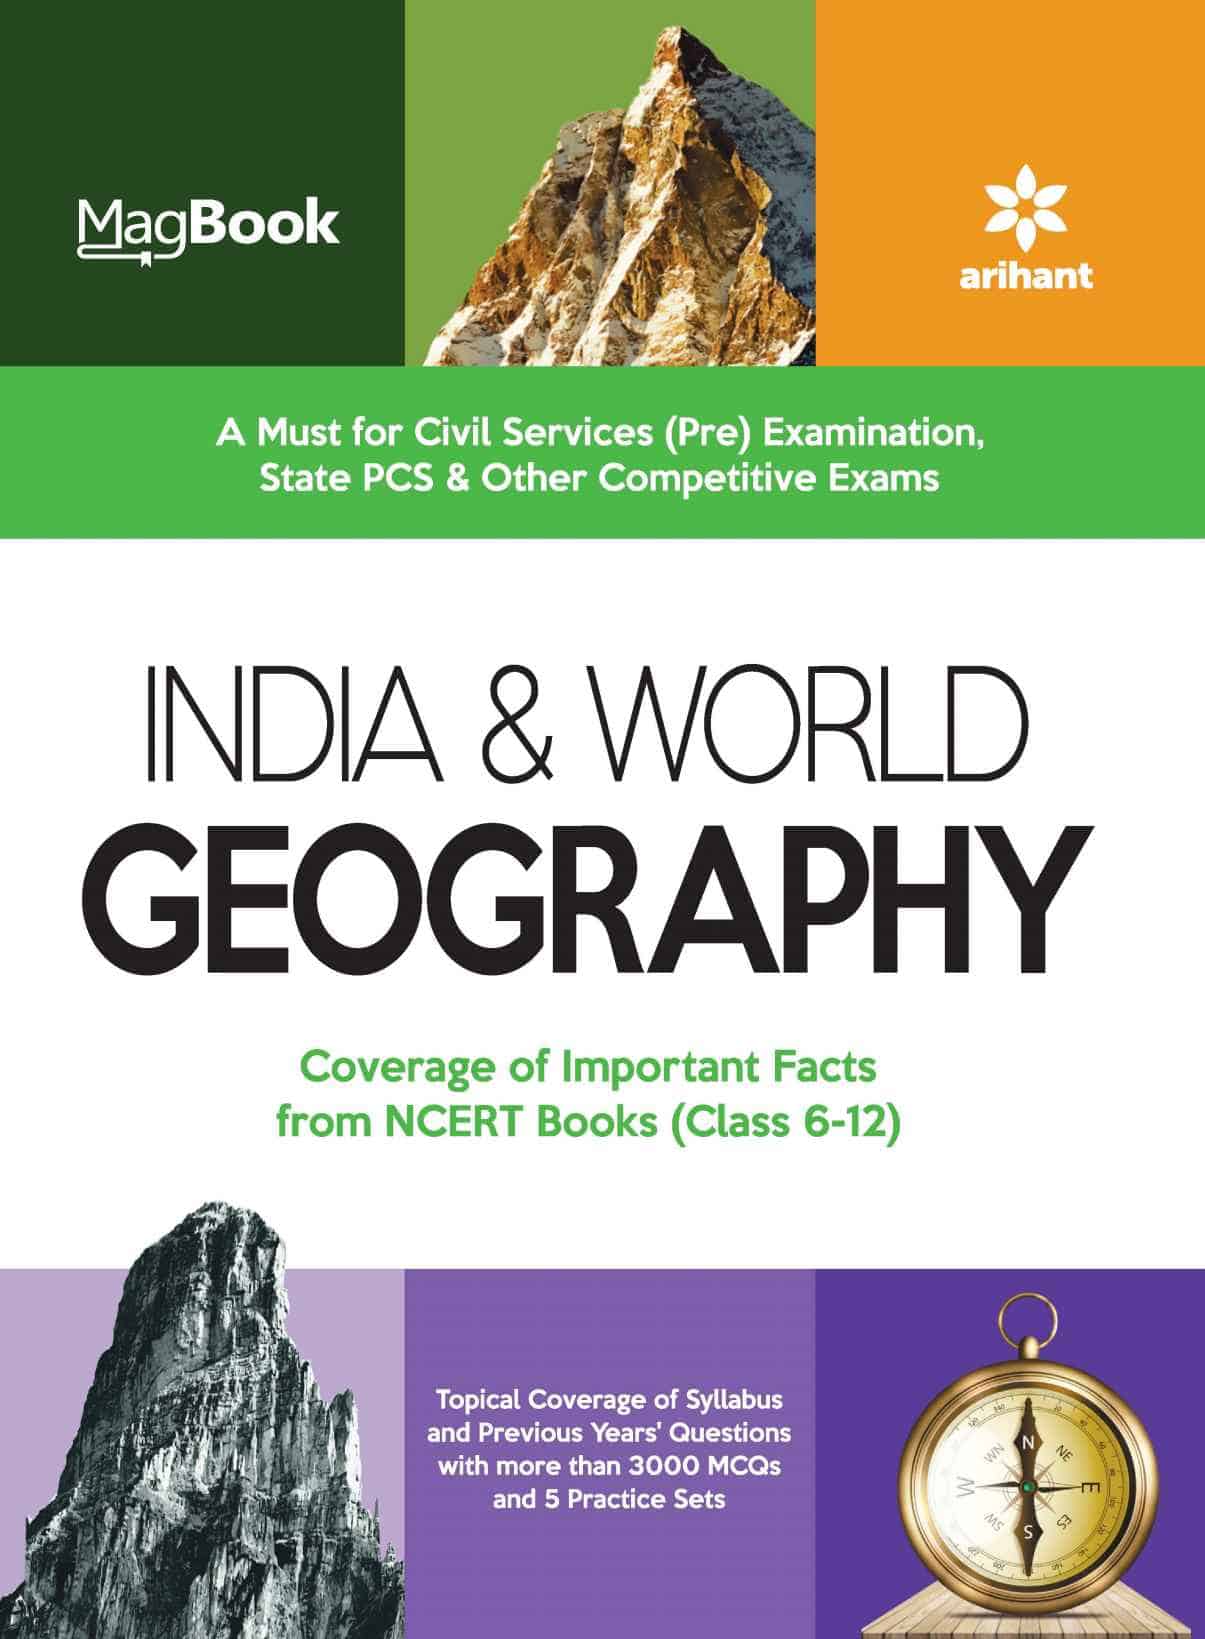 Arihant MagBook Indian Geography PDF [English Edition]